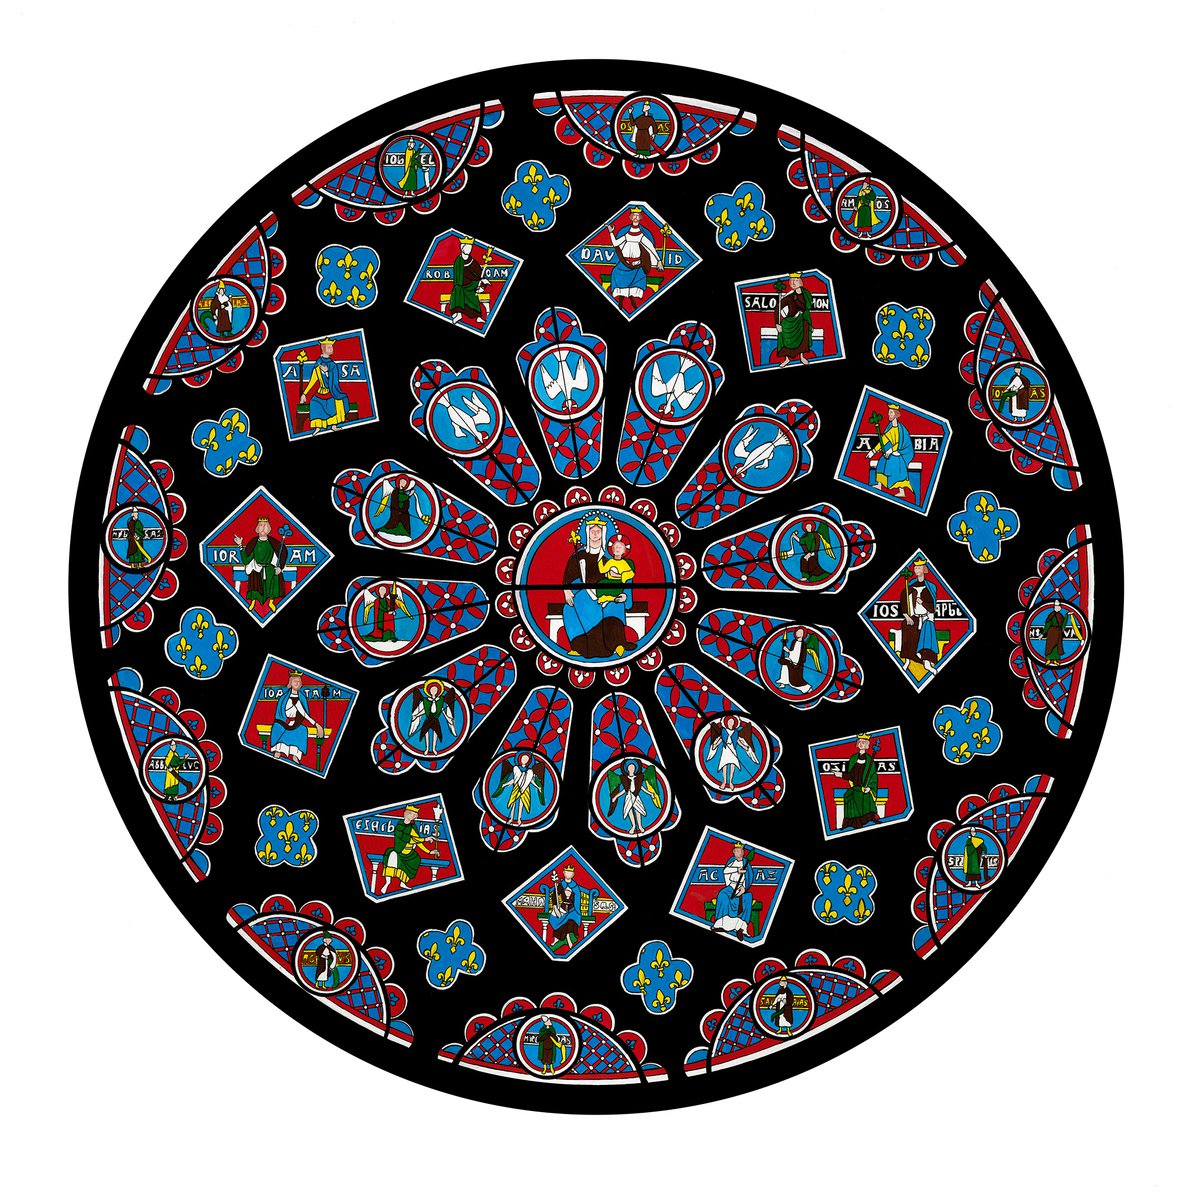 Chartres Cathedral Rose Window by Shelley Ashkowski